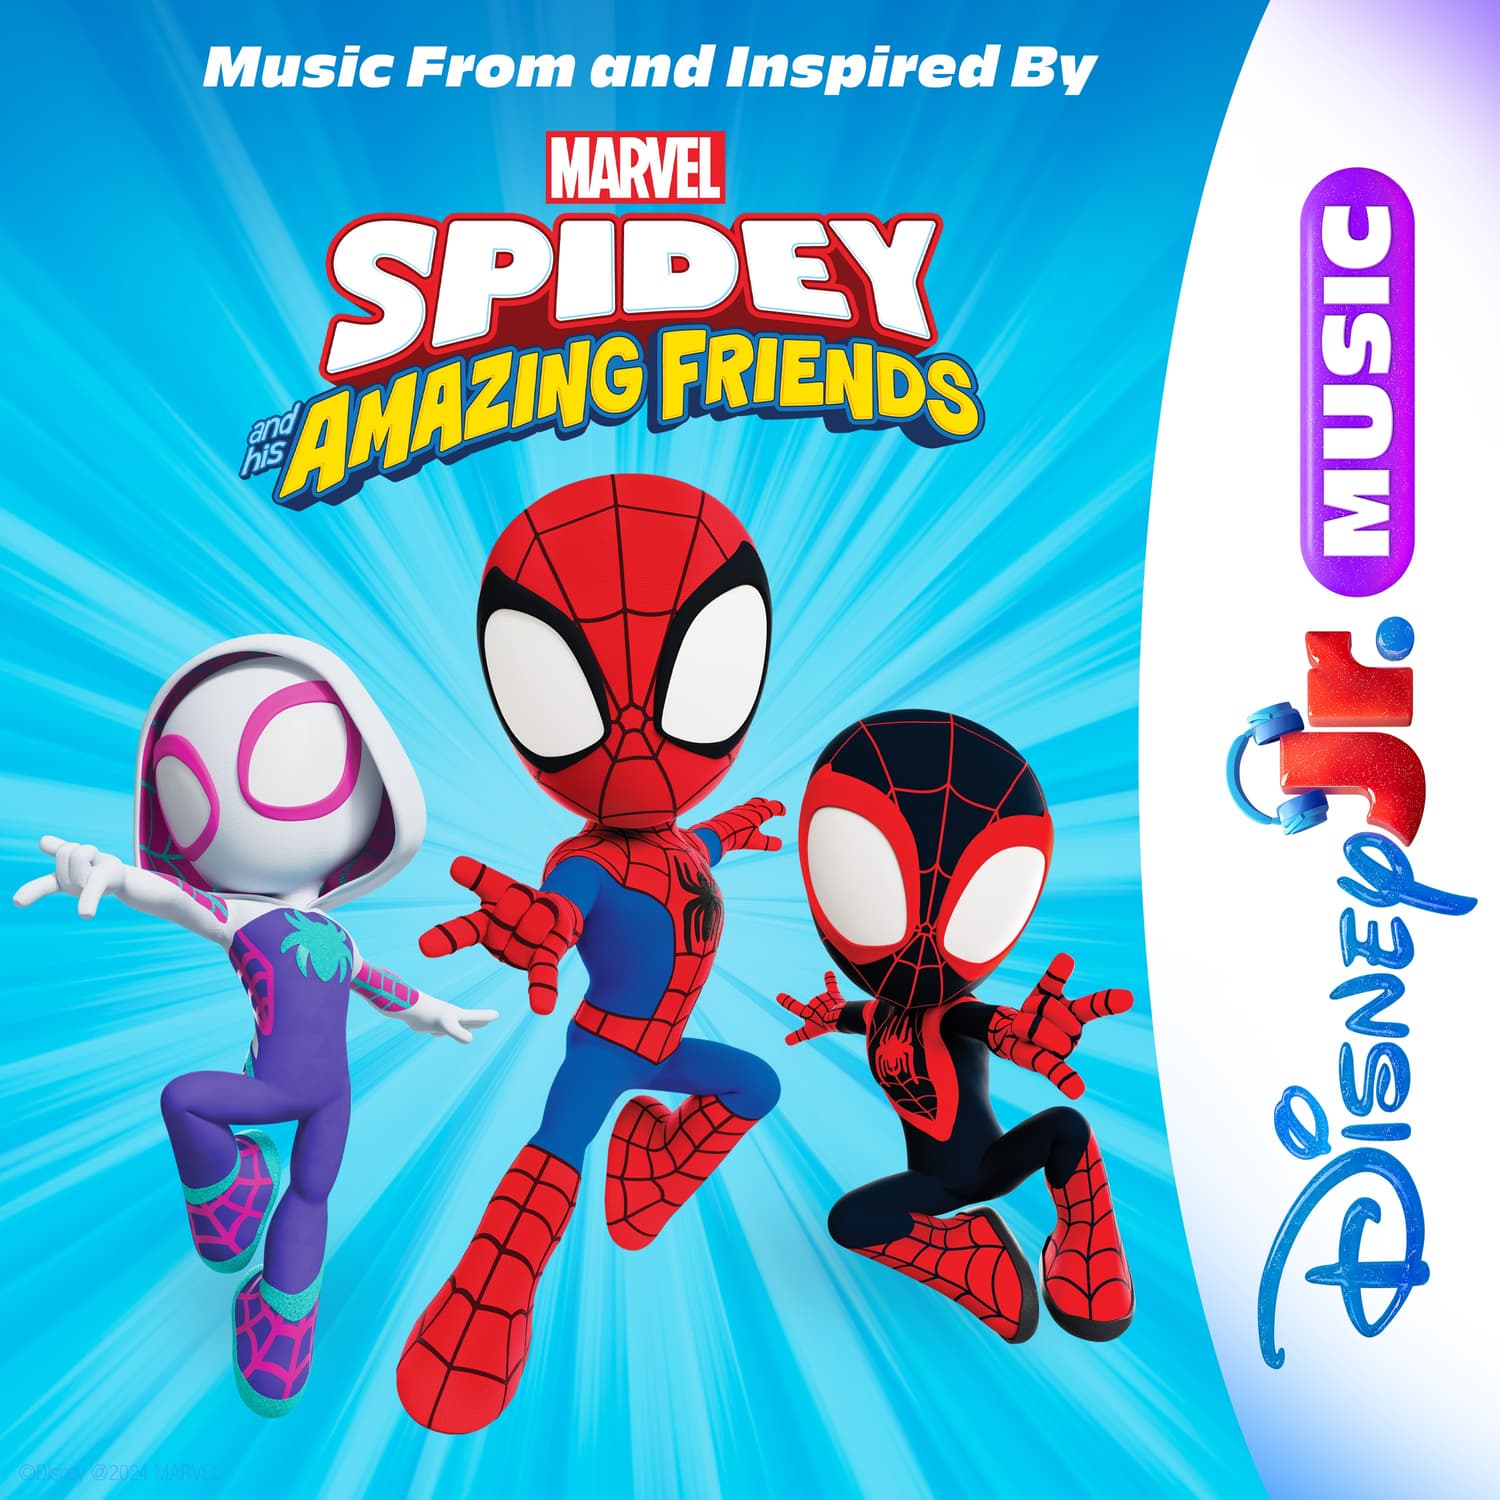 Spidey and his Amazing Friends album cover